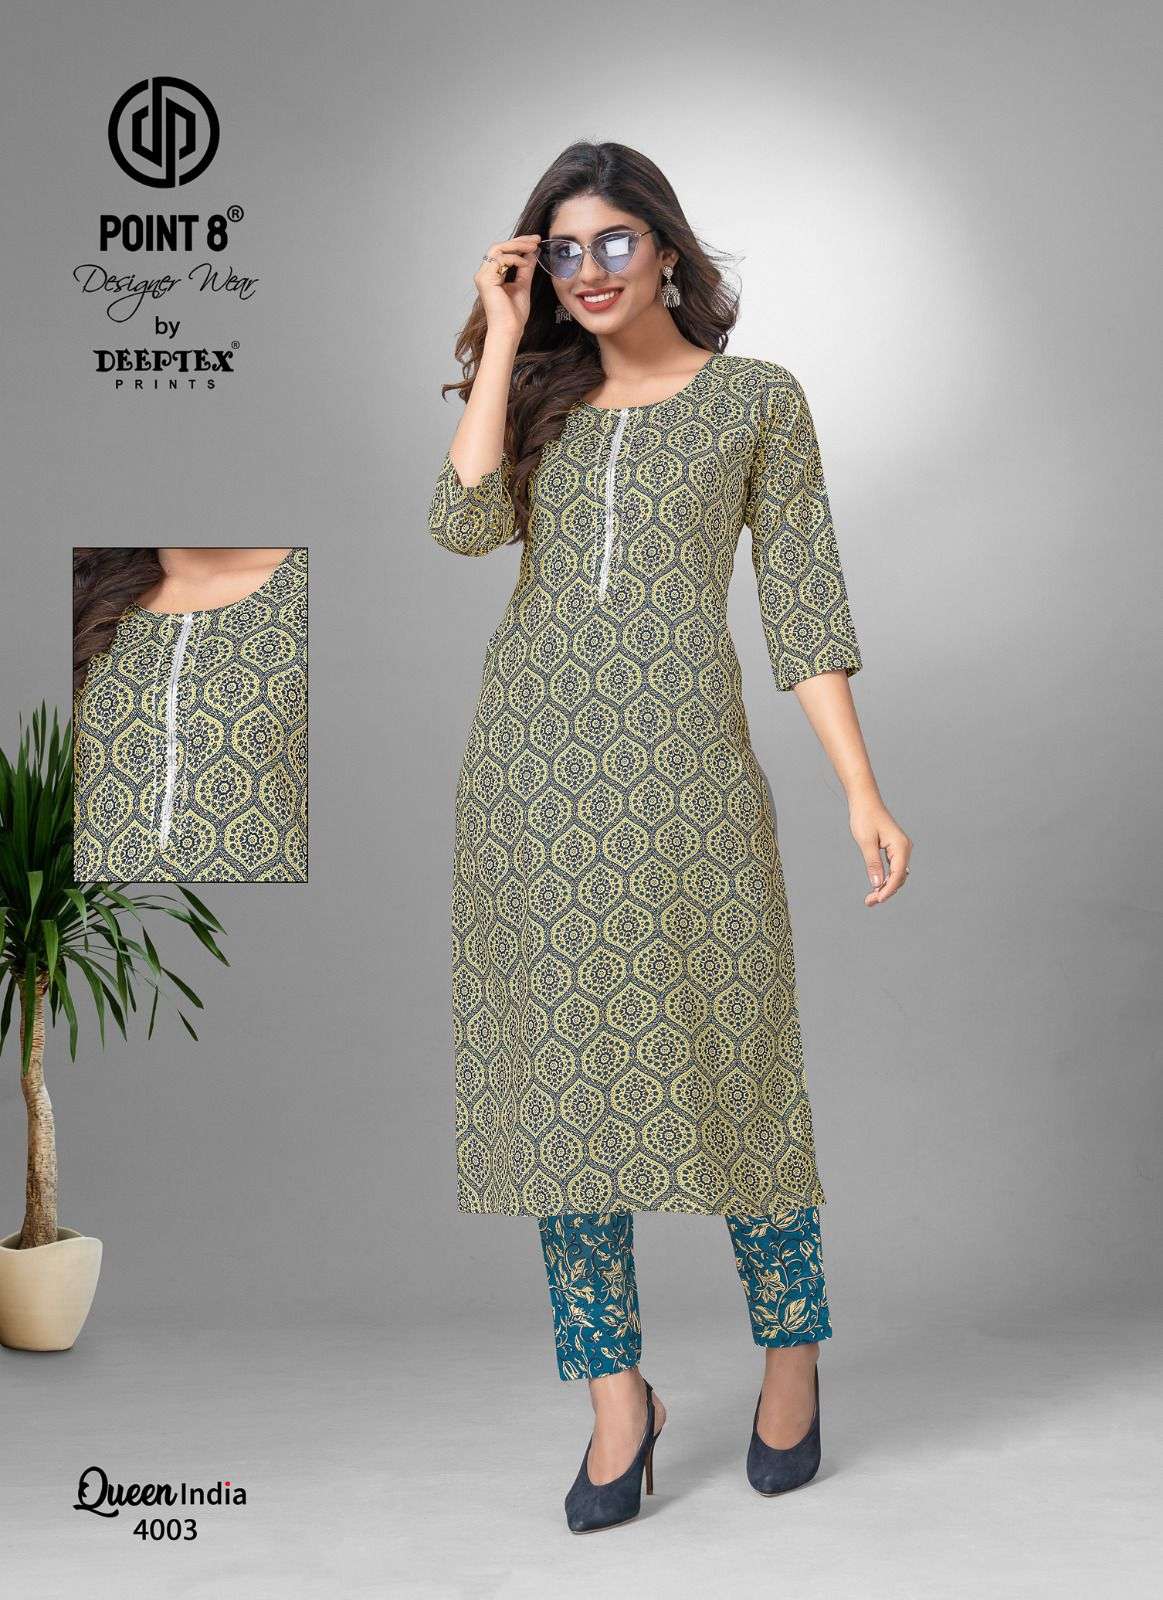 Beauty Queen Sparrow Fancy Designer Casual Wear Rayon Printed Kurti  Collection - The Ethnic World